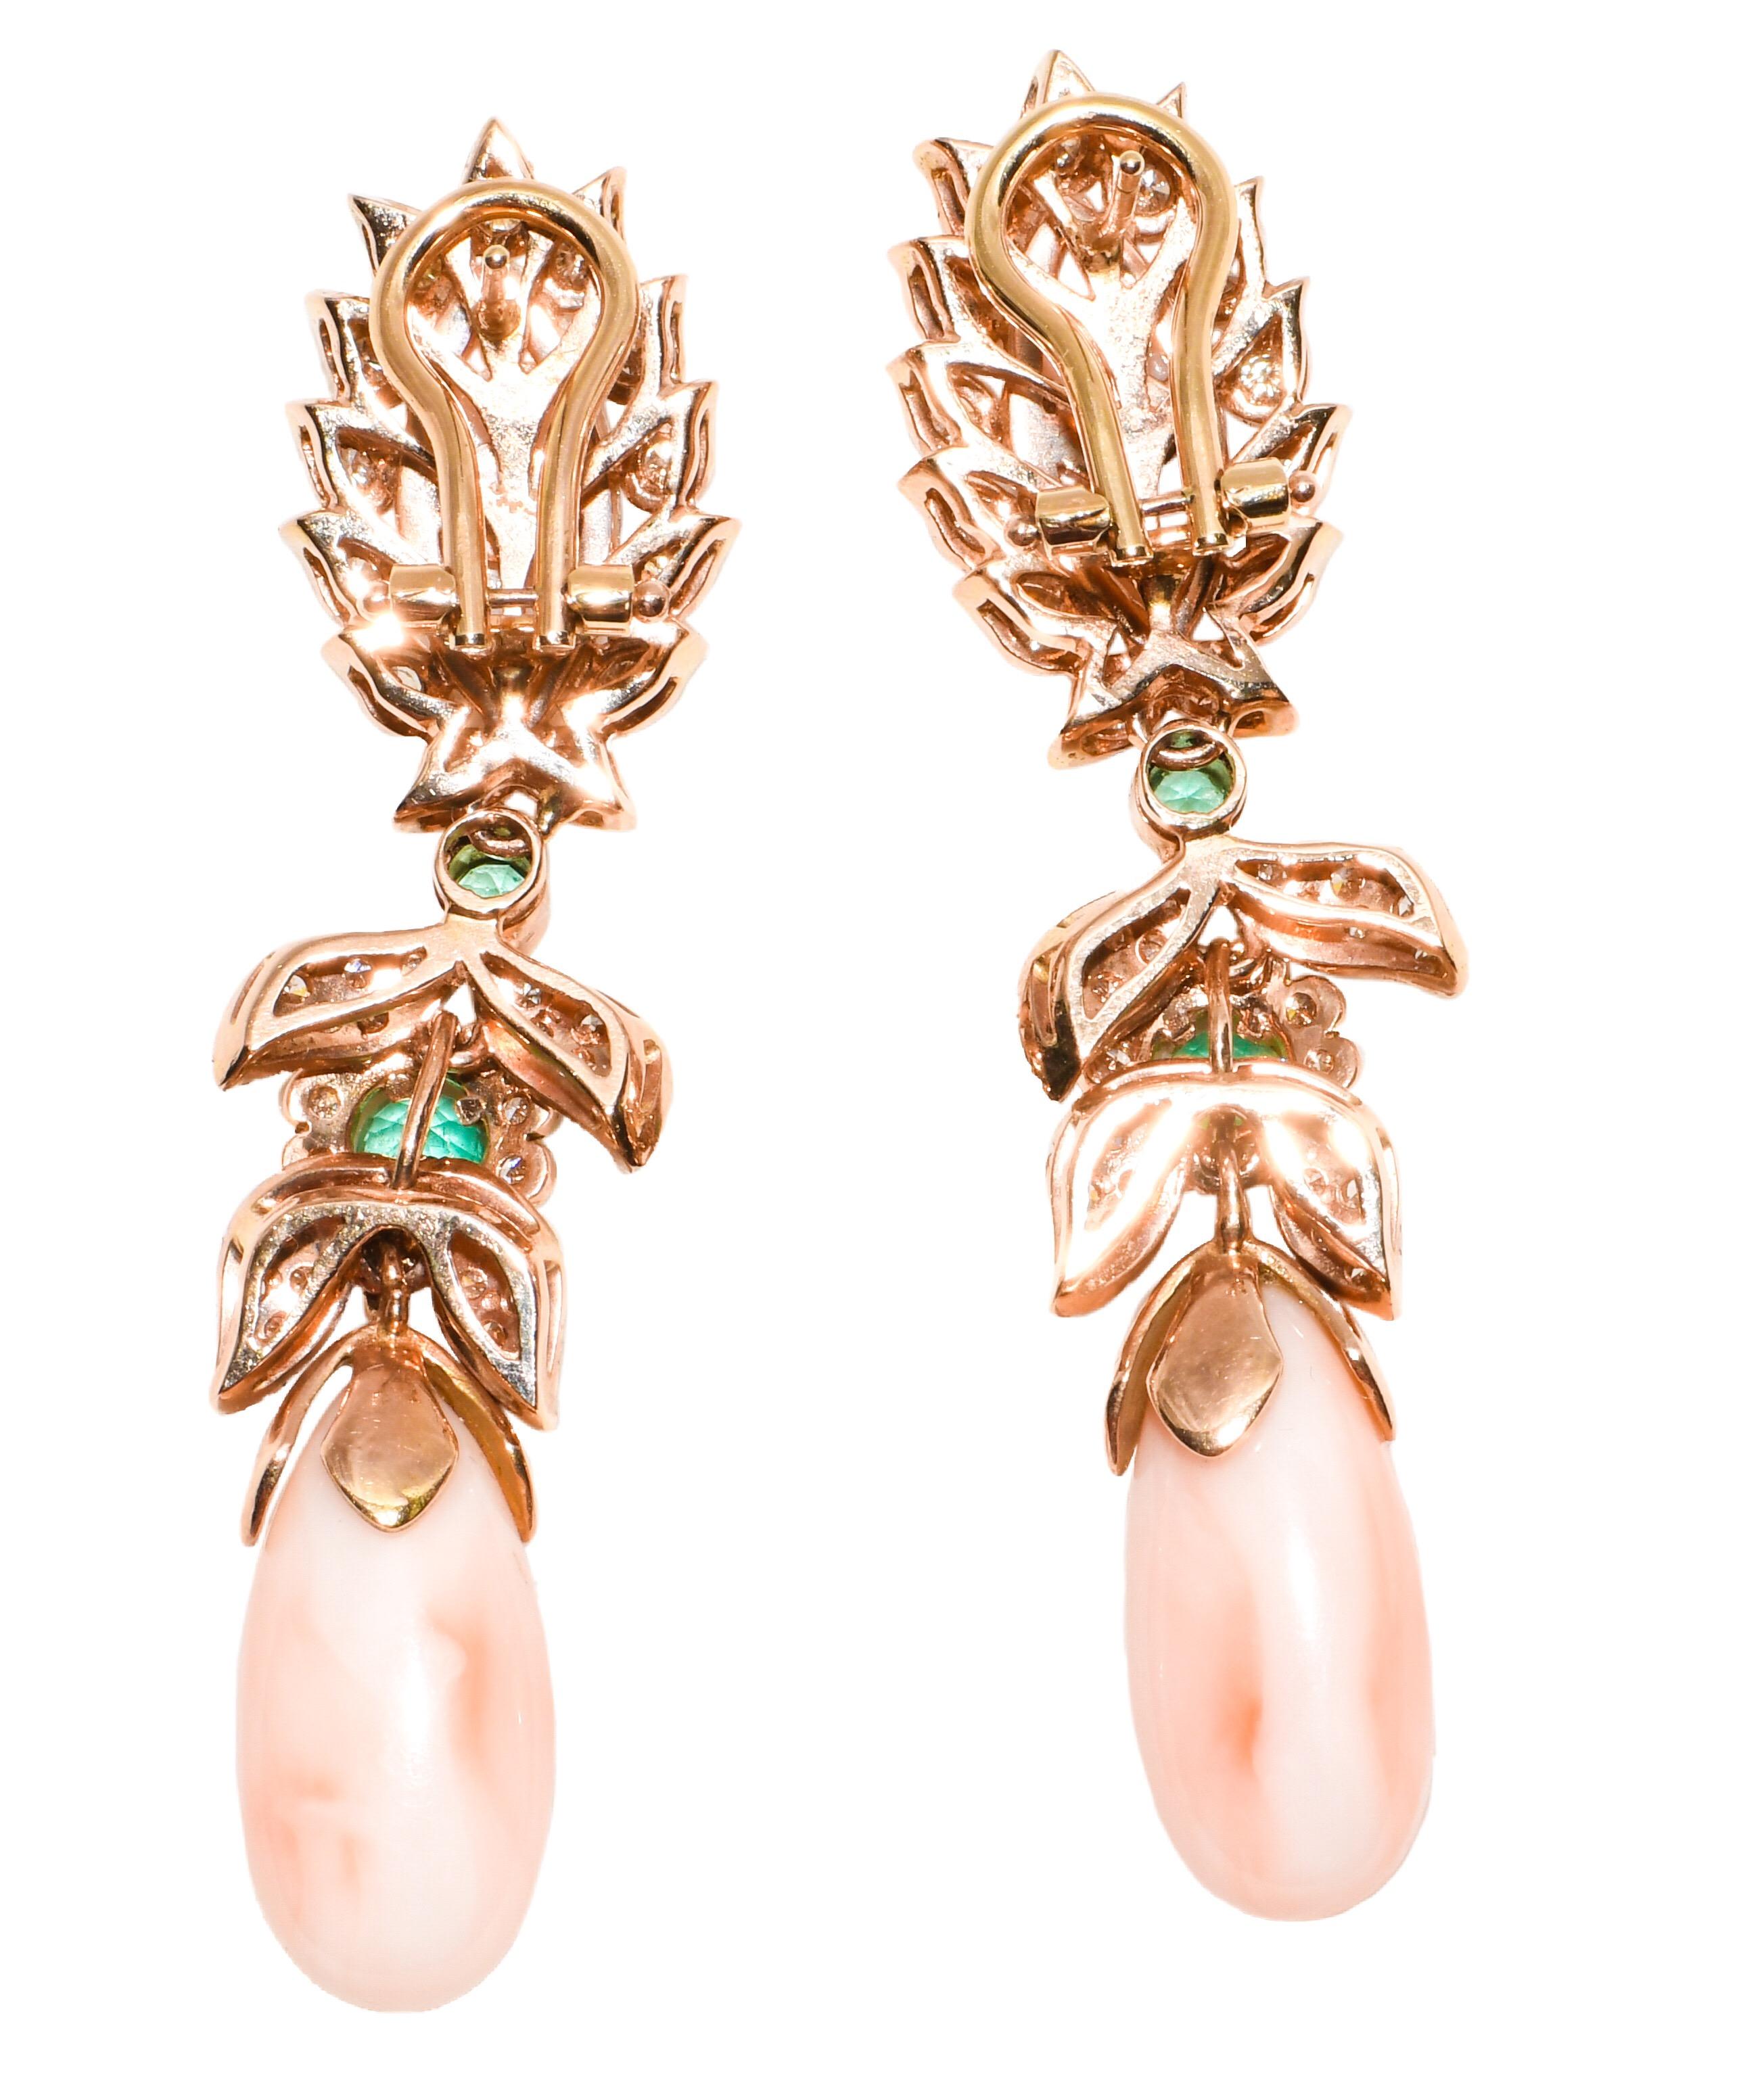 Fabricated in 14 karat yellow gold, these Italian beauties are unmistakably Luise Gioielli.  Marquise shape angel skin coral tops are framed in white diamonds.  Dangling effortlessly is a bezel set round emerald followed by more diamonds and another